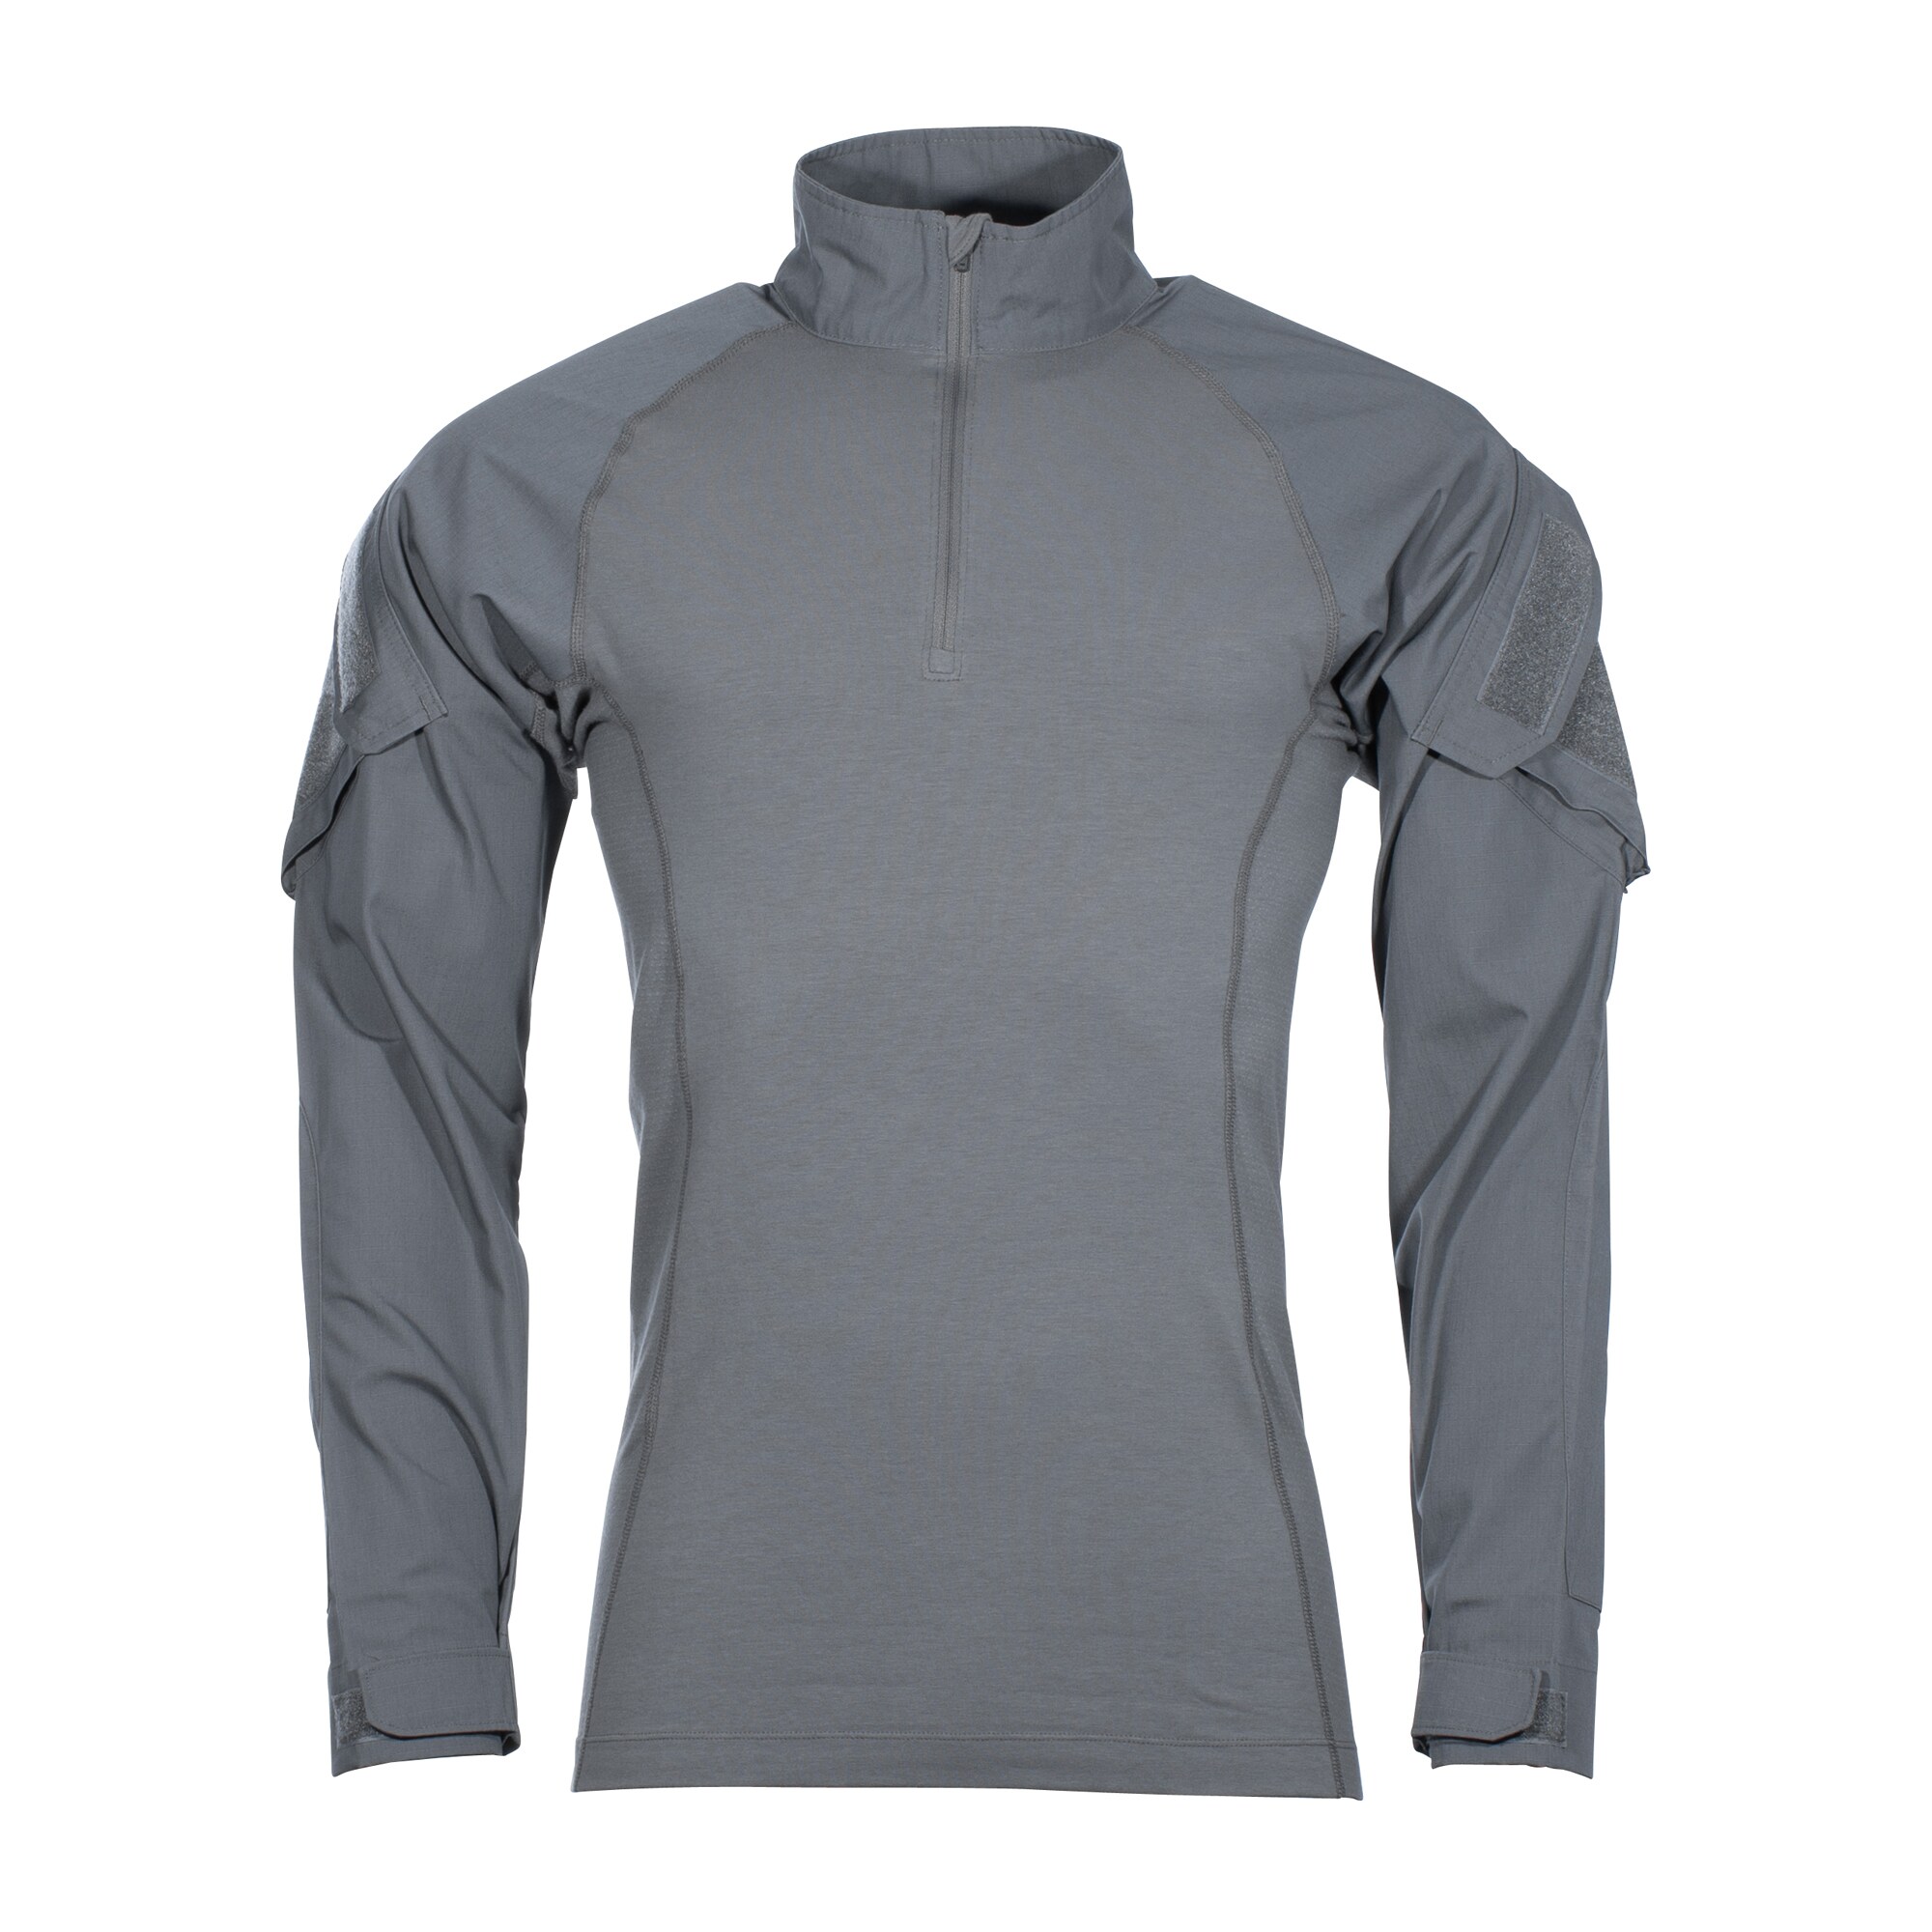 Purchase the 5.11 Pullover Shirt Rapid Assault gray by ASMC